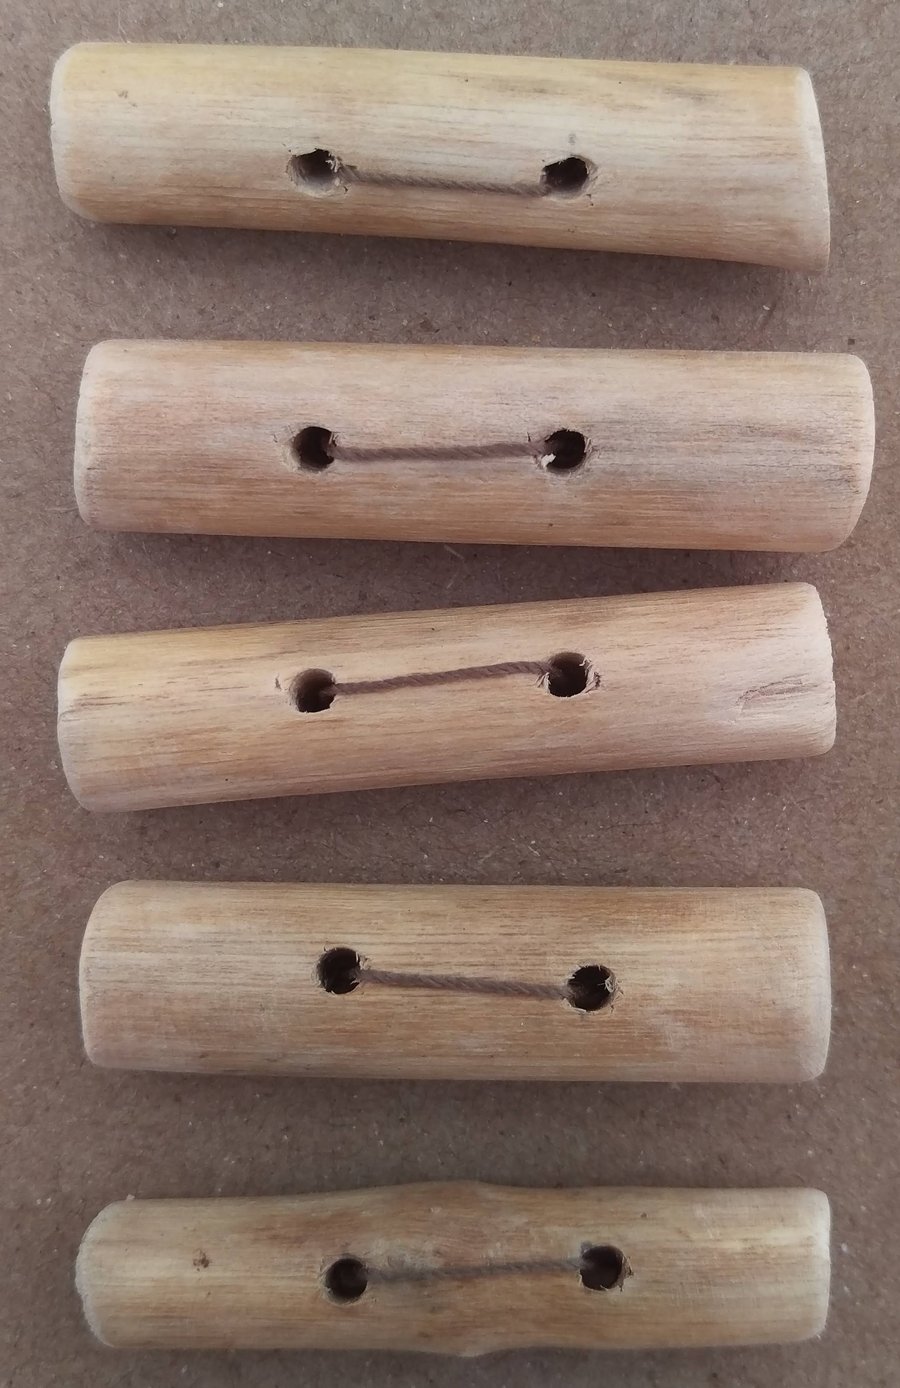 Beachcombed Toggle Buttons, 5 buttons made from pale coloured driftwood